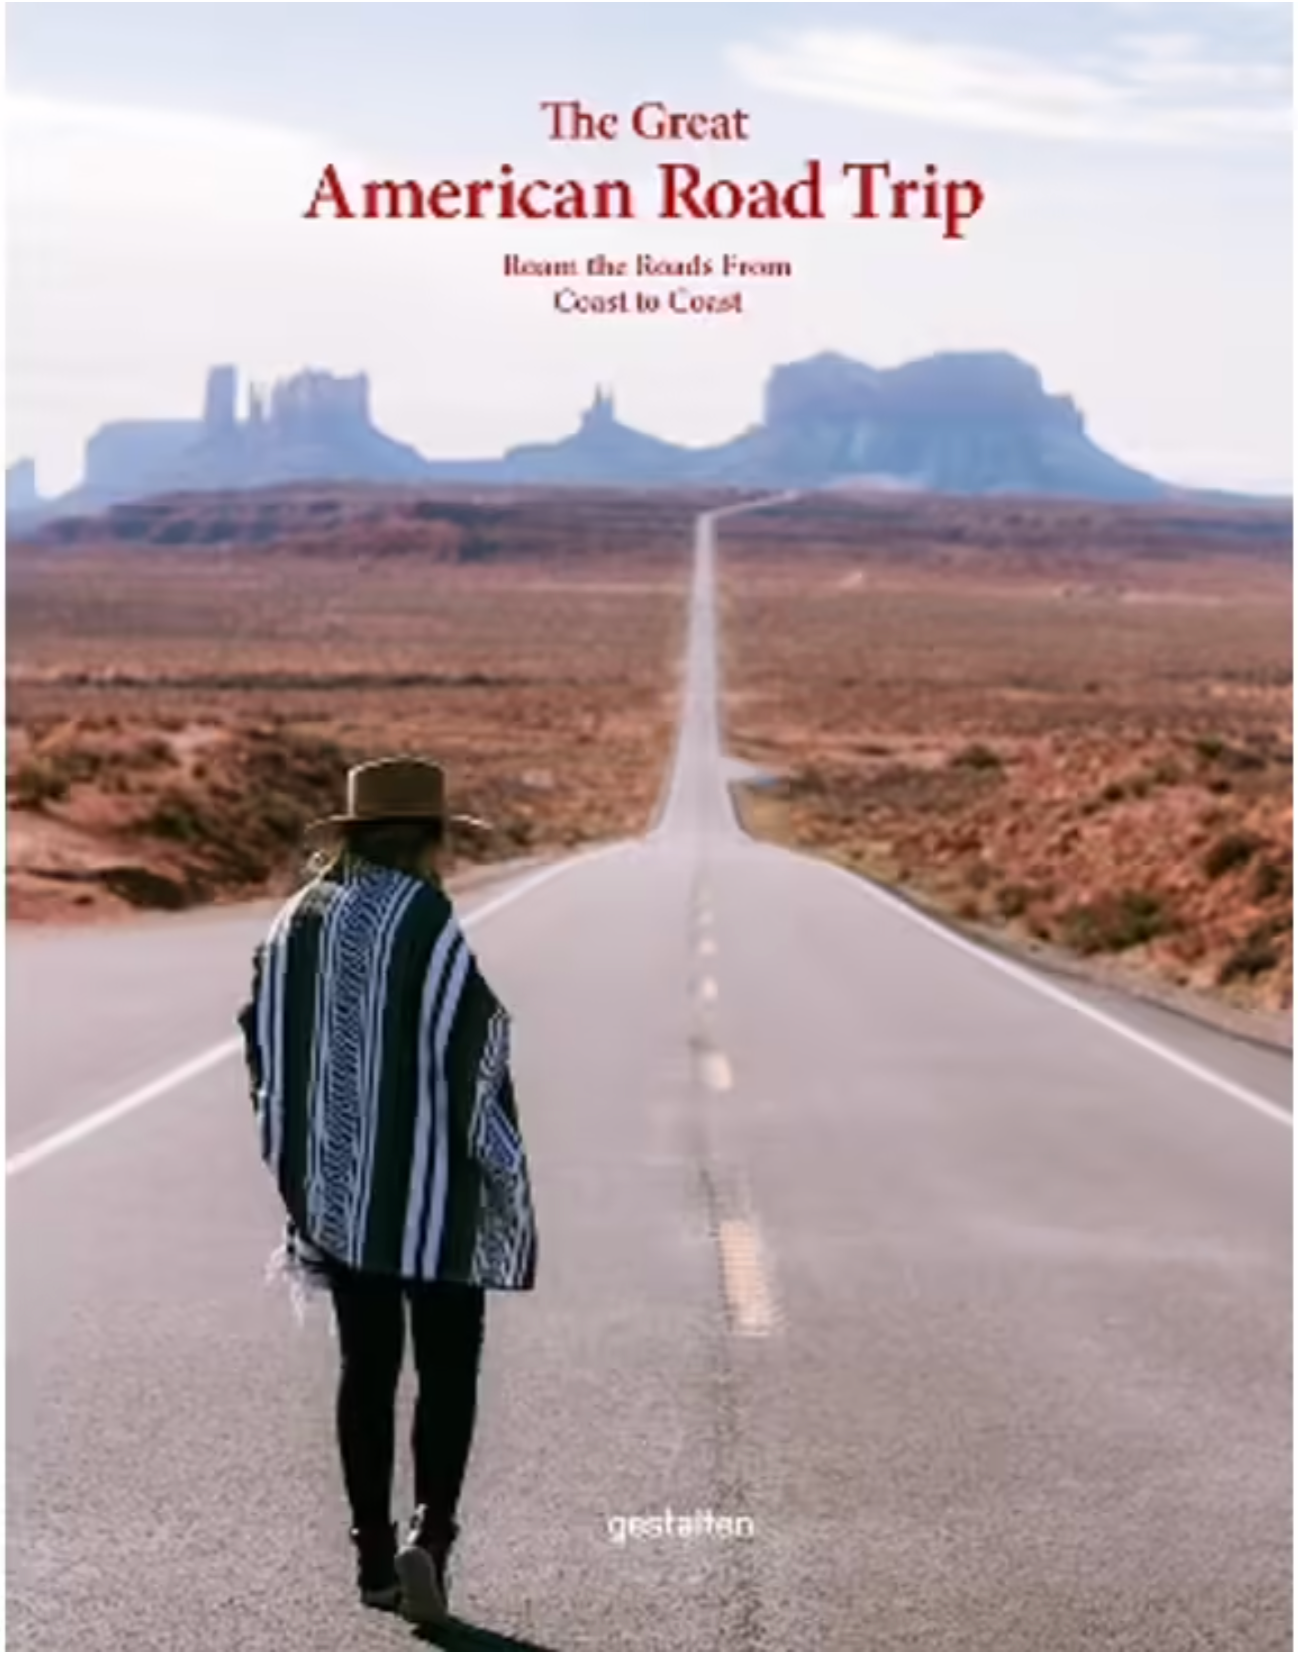 The Great American Road Trip Eclectopia Gifts and Specialty Homewares 